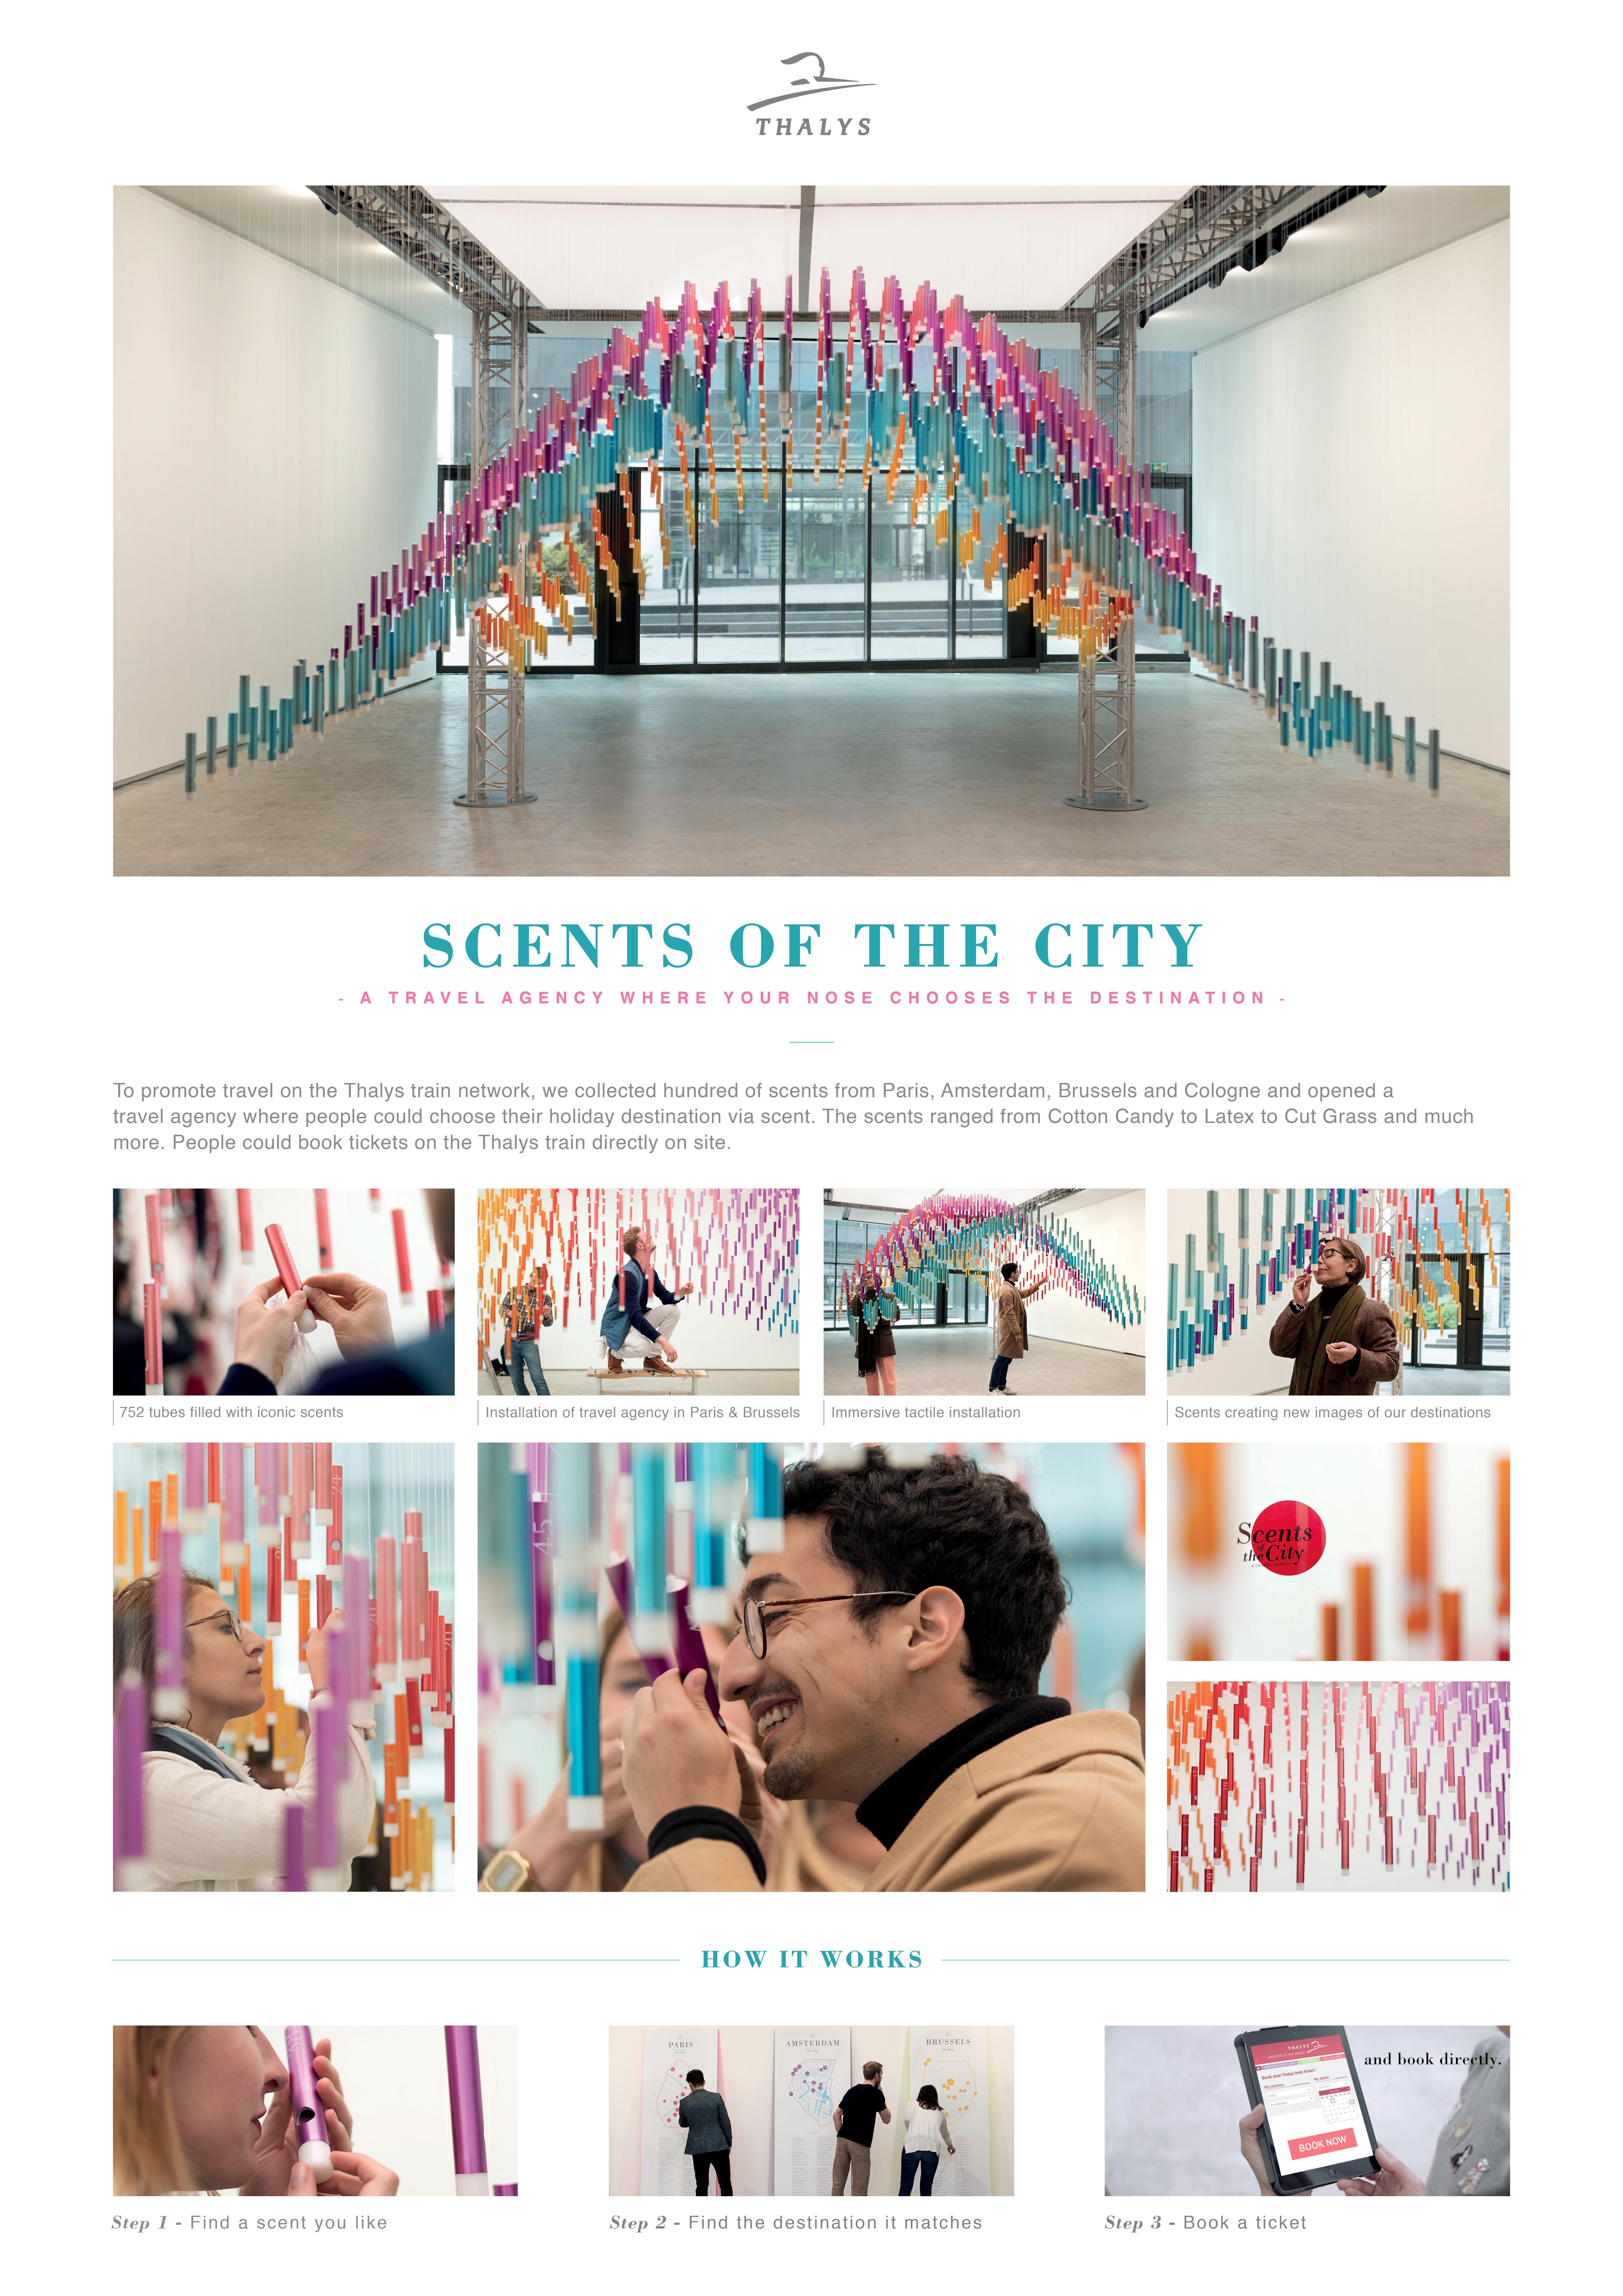 SCENTS OF THE CITY